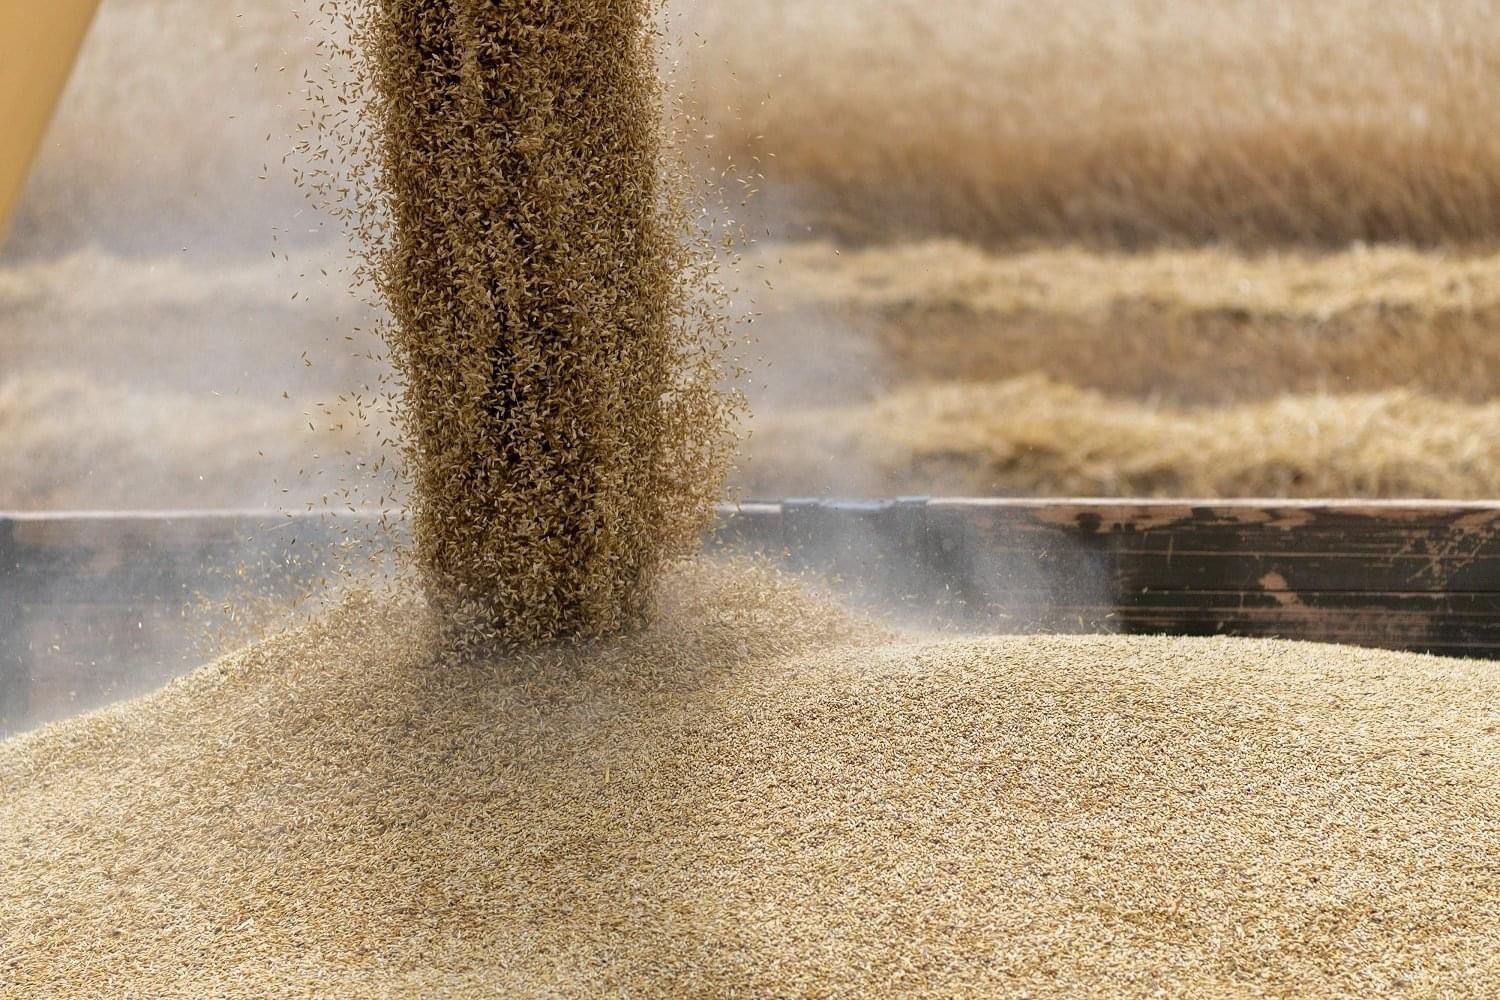 Kazakhstan lifts restrictions on wheat exports